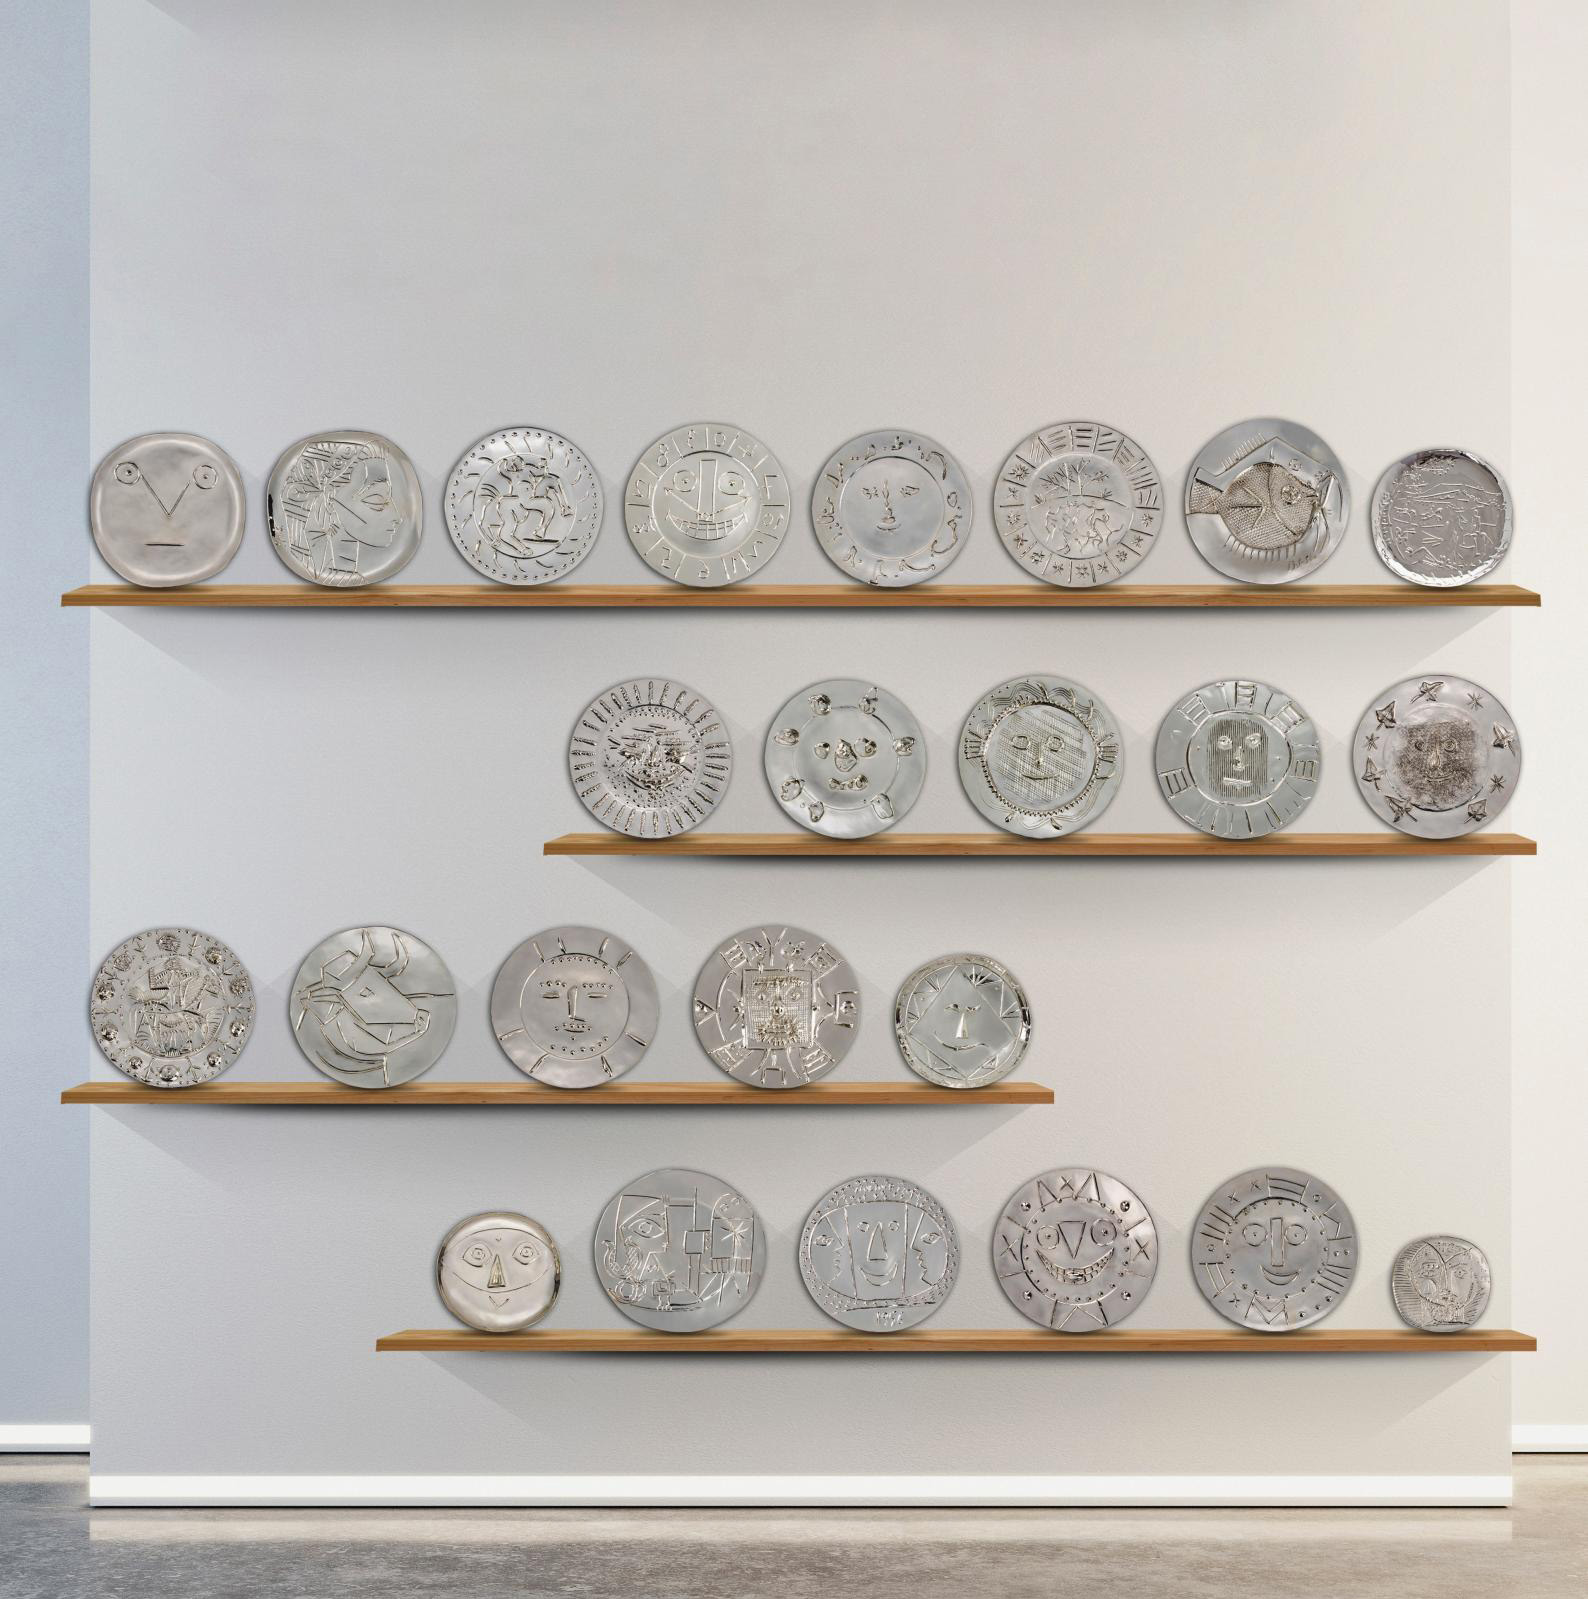 Pablo Picasso, François Hugo, complete set of 24 repoussé silver plates, limited edition, designed in 1955-1956, on each plate the stamp o